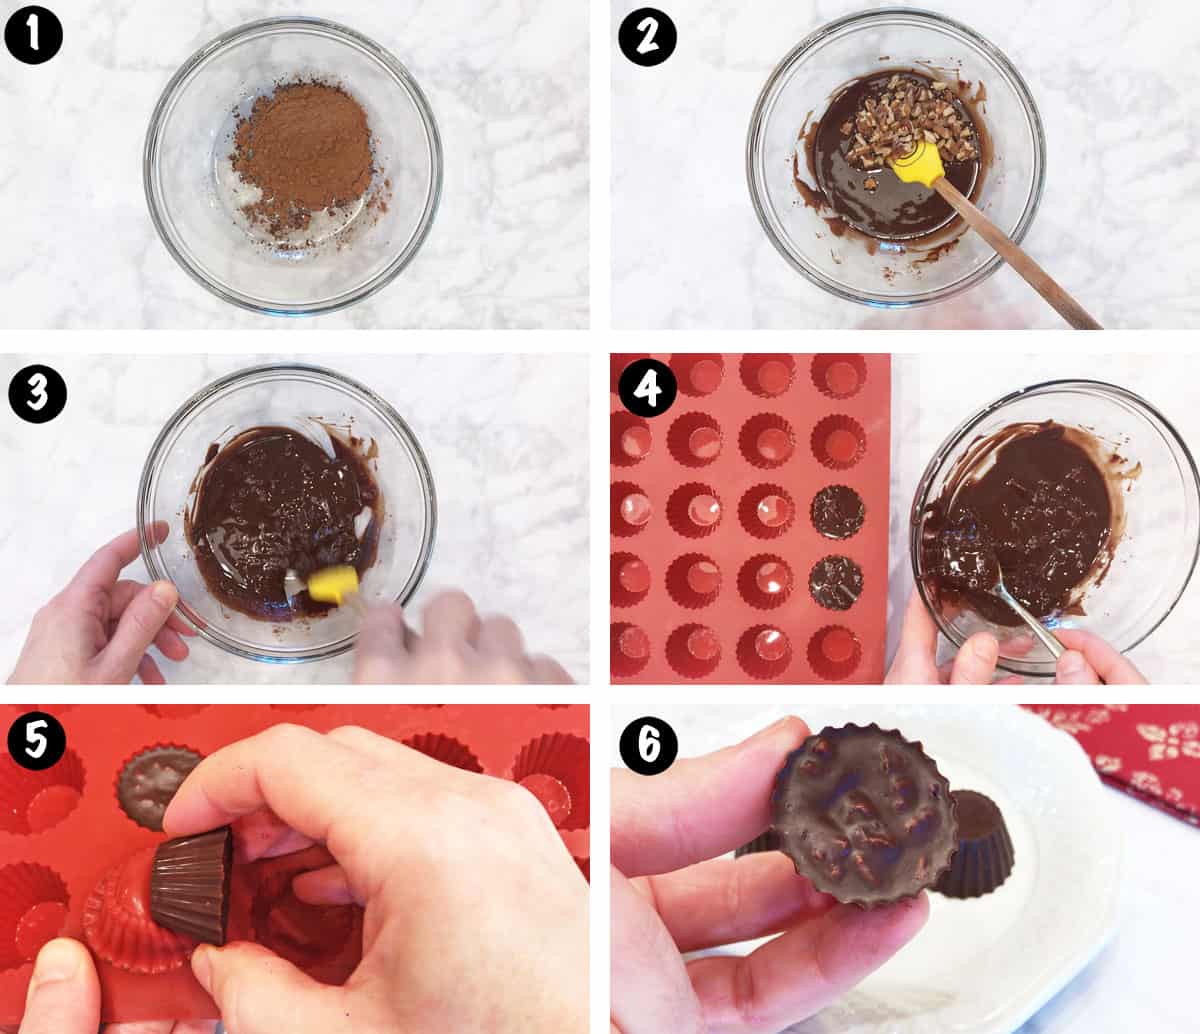 A six-photo collage showing the steps for making keto chocolate at home. 